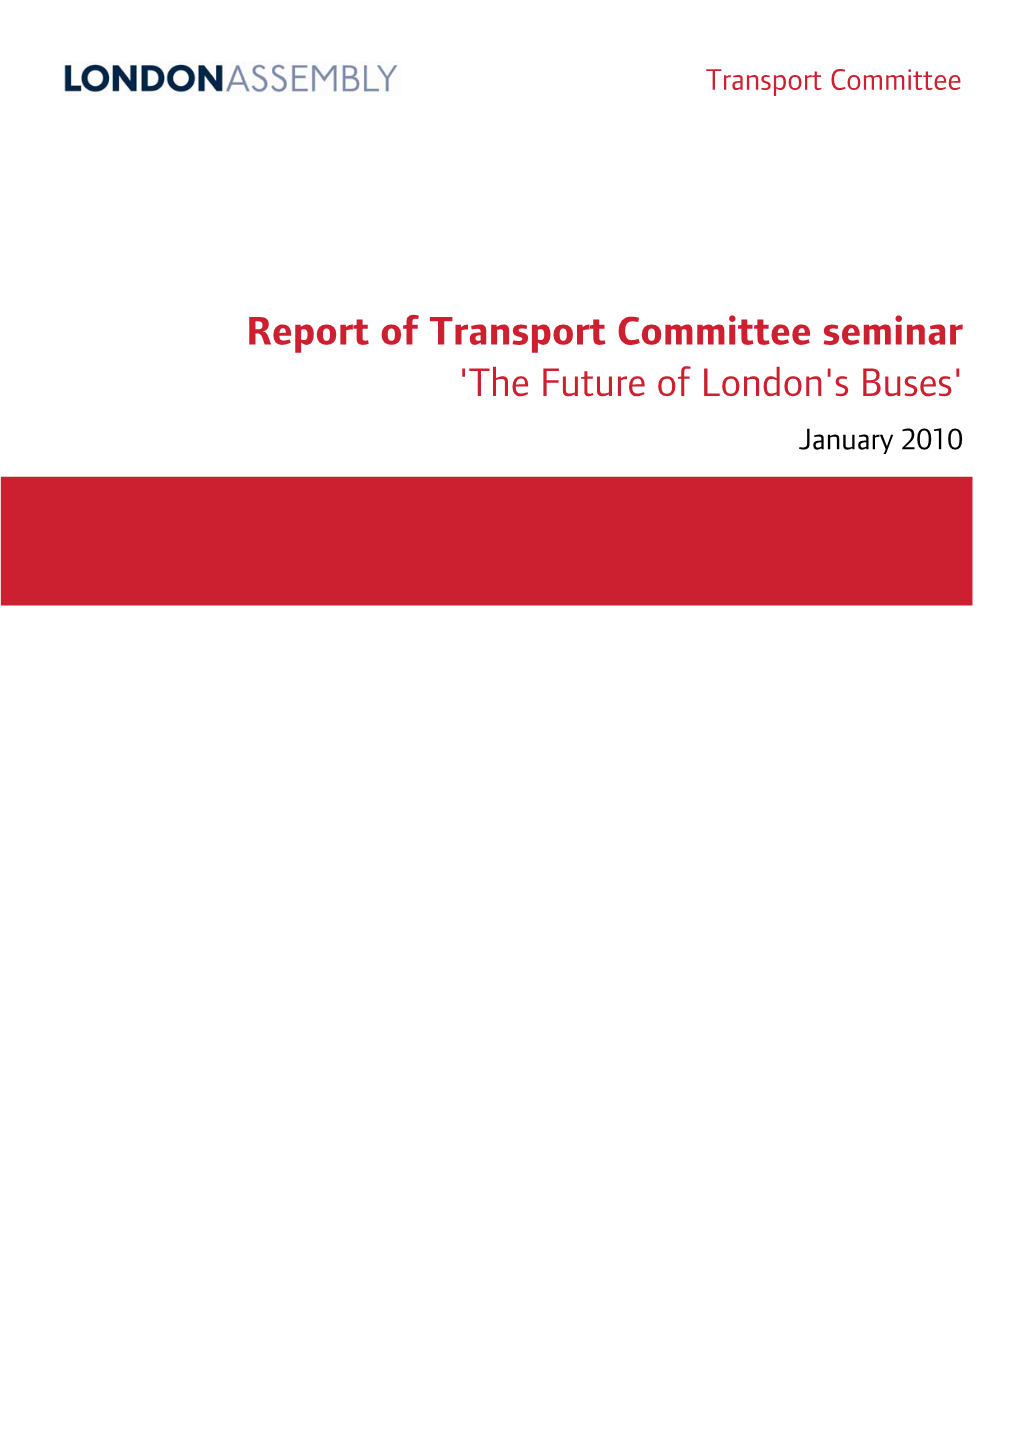 'The Future of London's Buses' January 2010